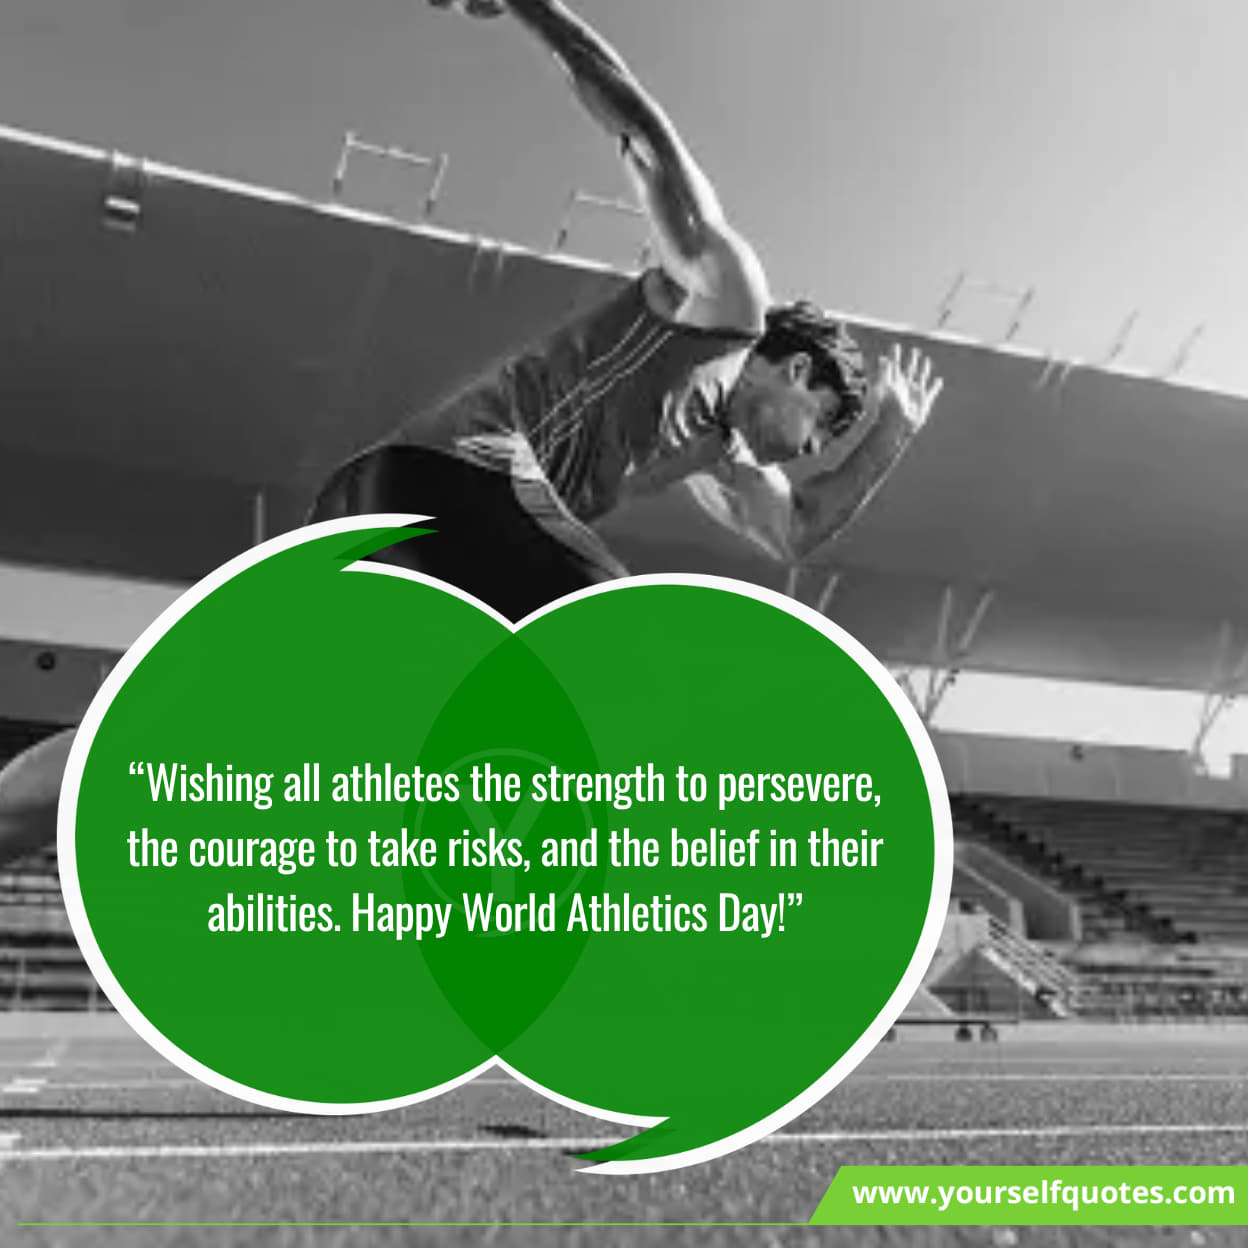 Wishes for a memorable and inspiring World Athletics Day celebration